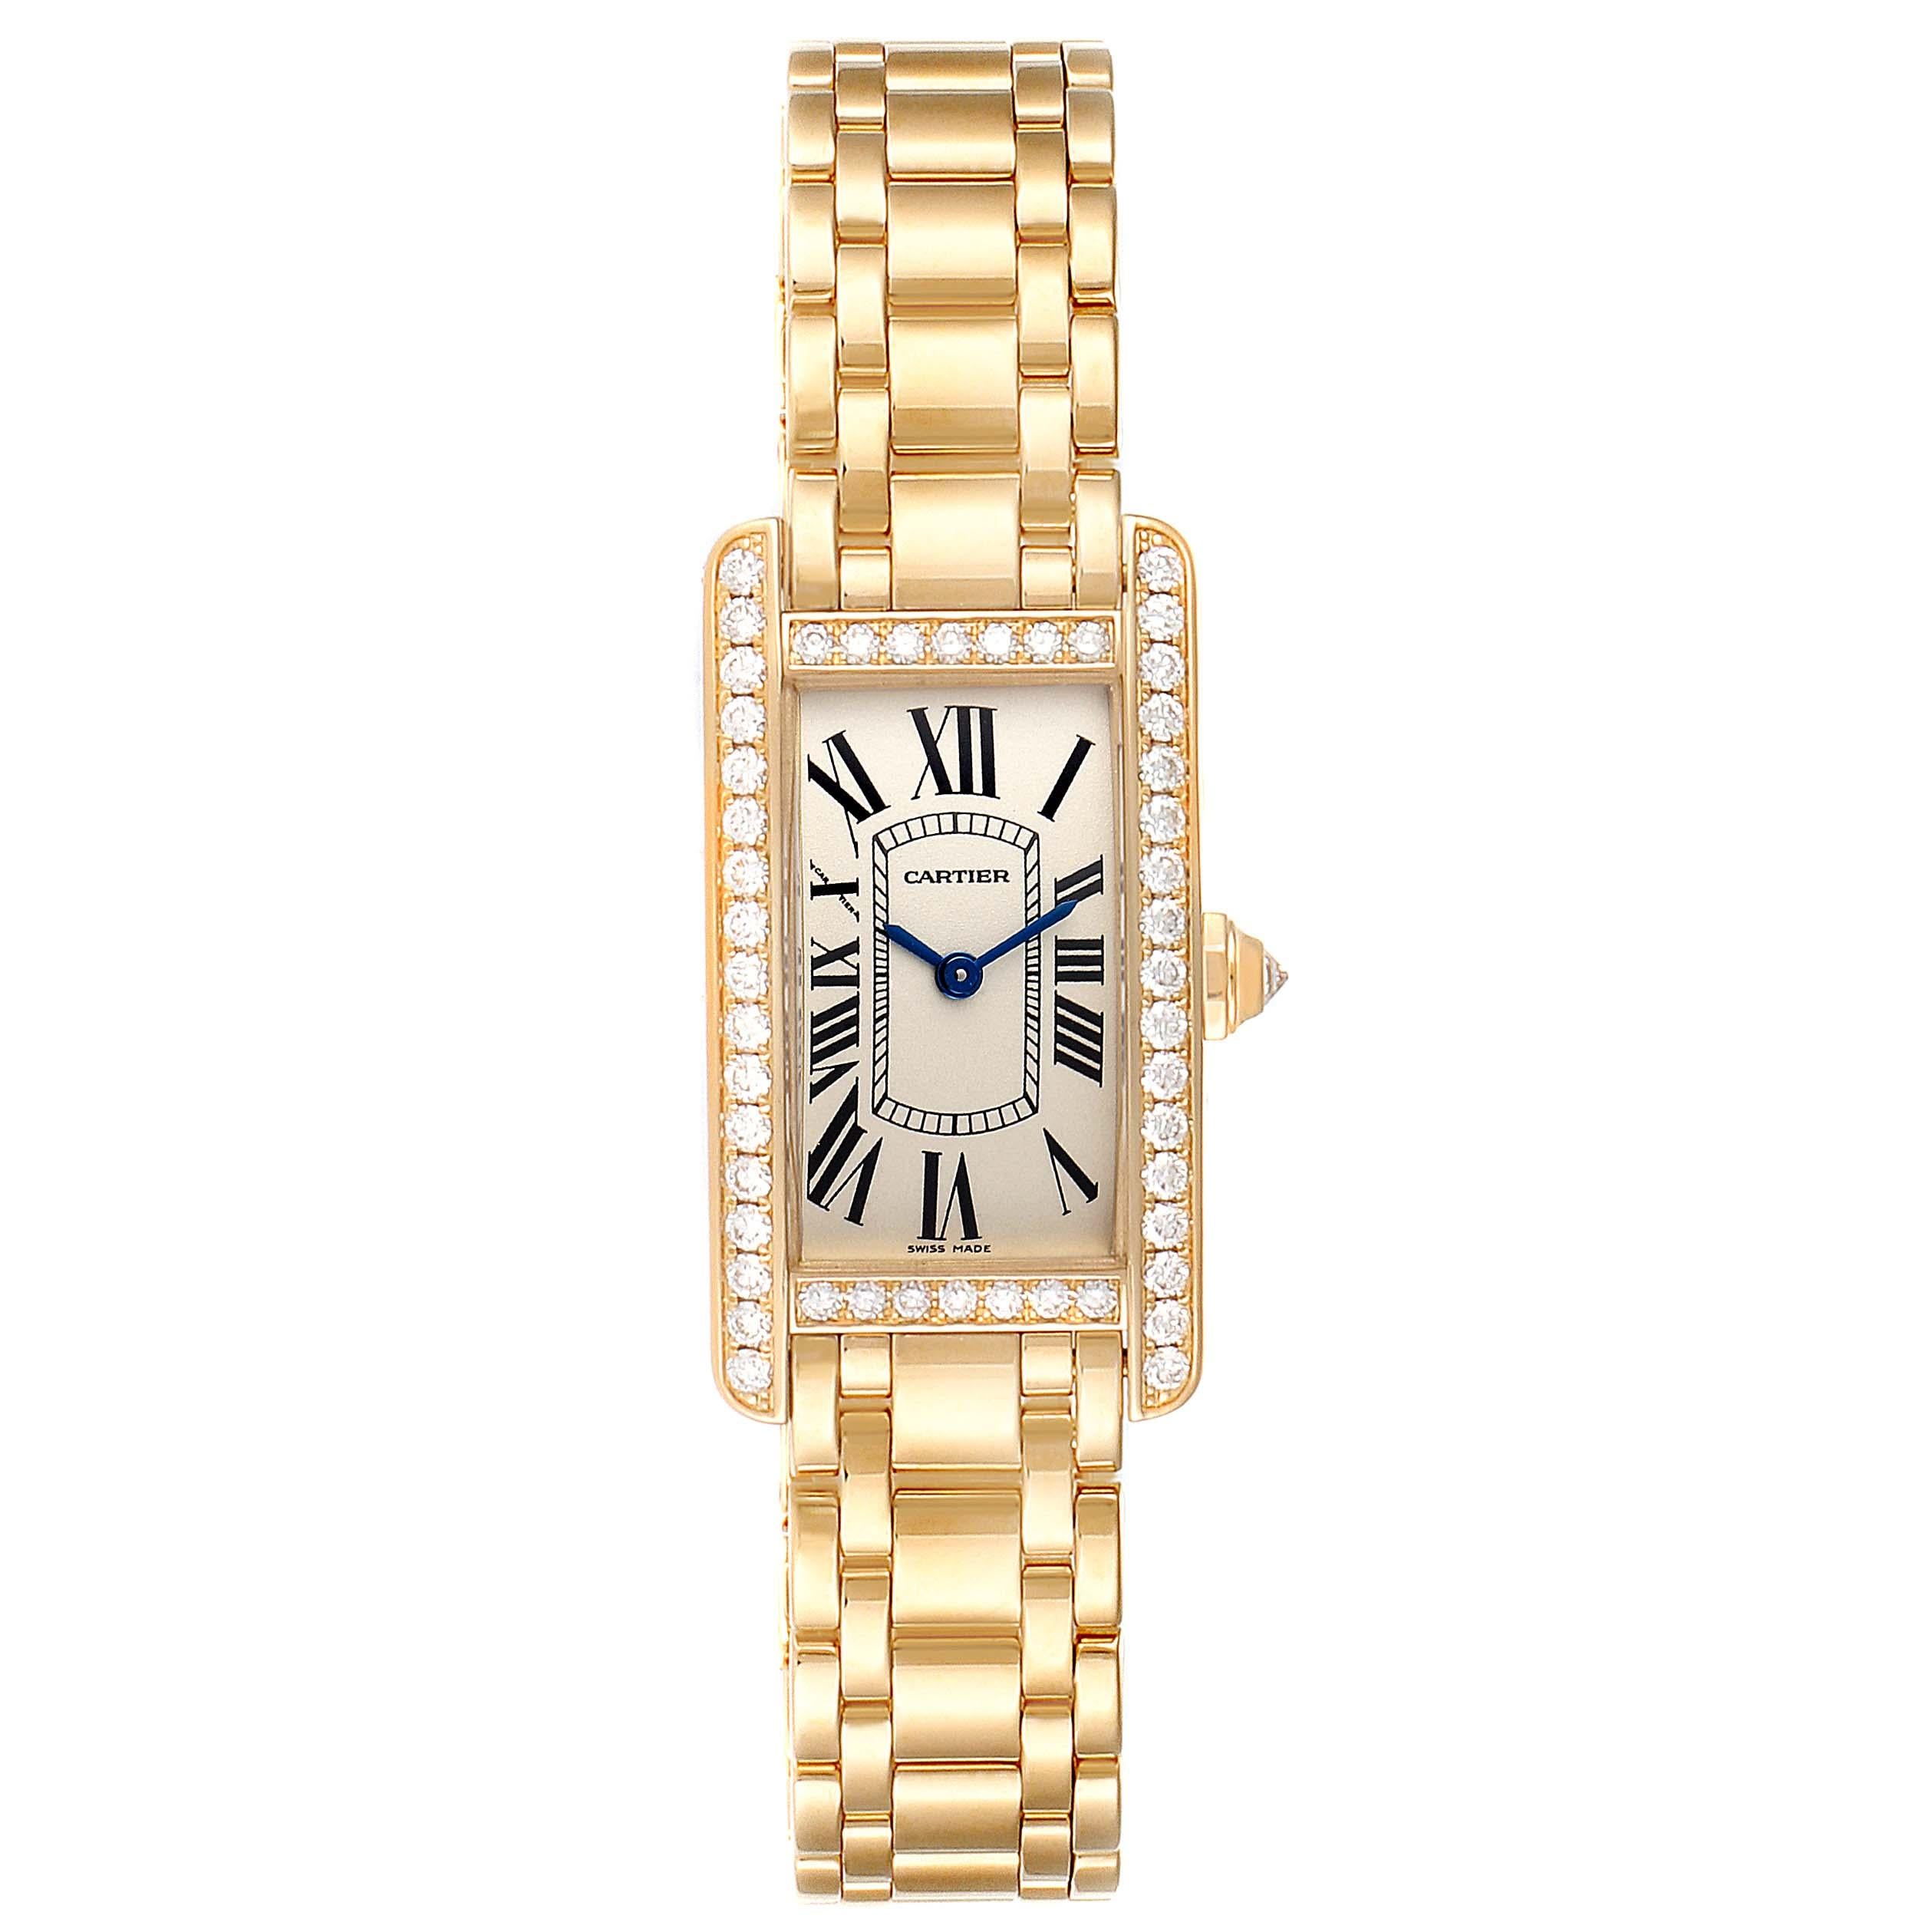 Cartier Tank Americaine Yellow Gold Diamond Ladies Watch WB7072K2 Box Papers. Quartz movement. 18K yellow gold case 19.0 x 35.0 mm. Circular grained crown set with faceted diamond. . Scratch resistant sapphire crystal. Silvered grained dial with